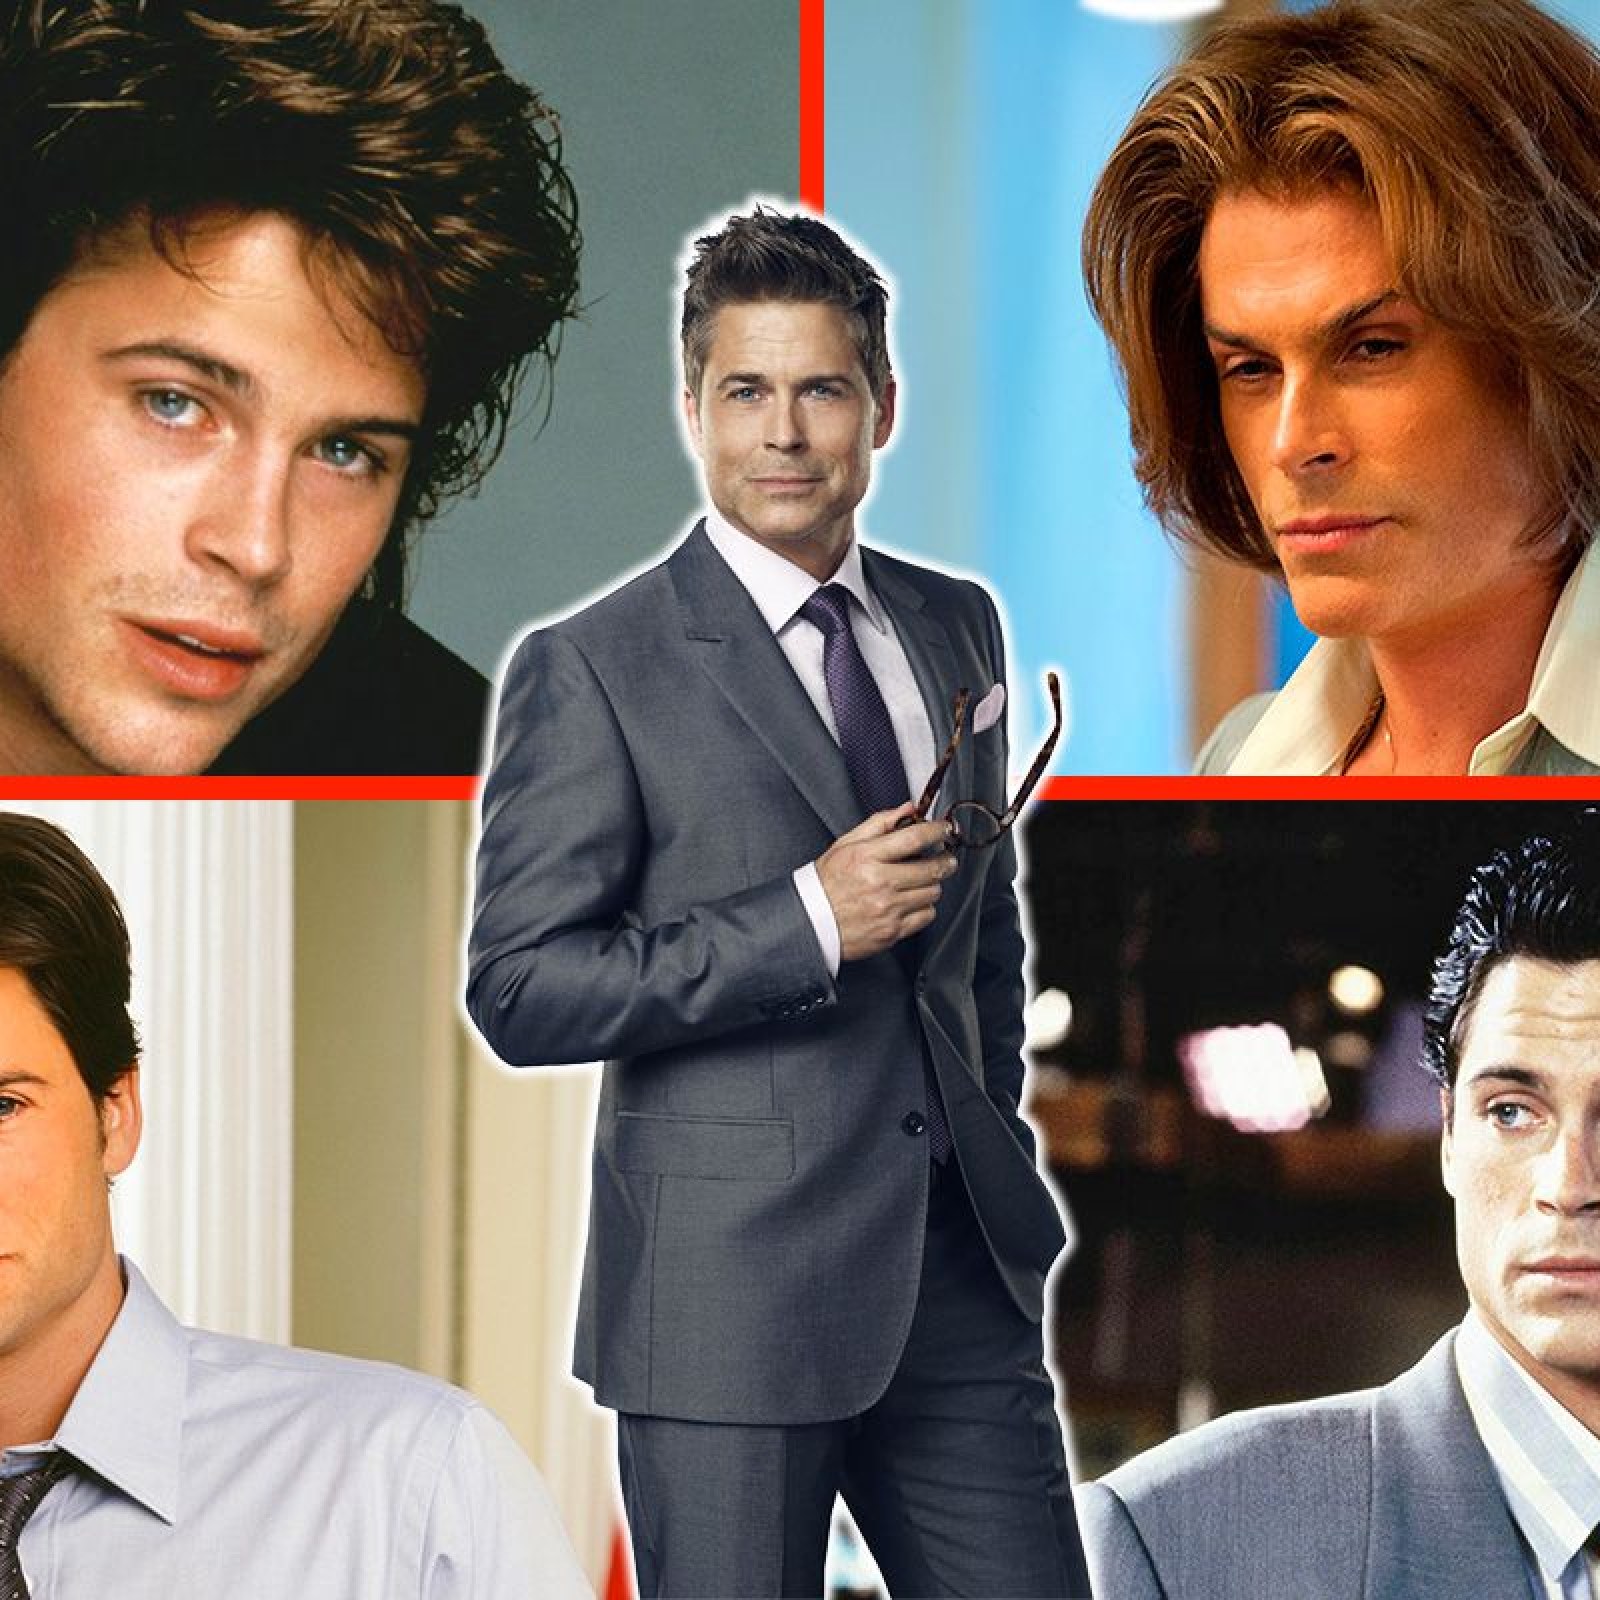 Rob Lowe S 55th Birthday His 15 Best Movies And Tv Shows Ranked